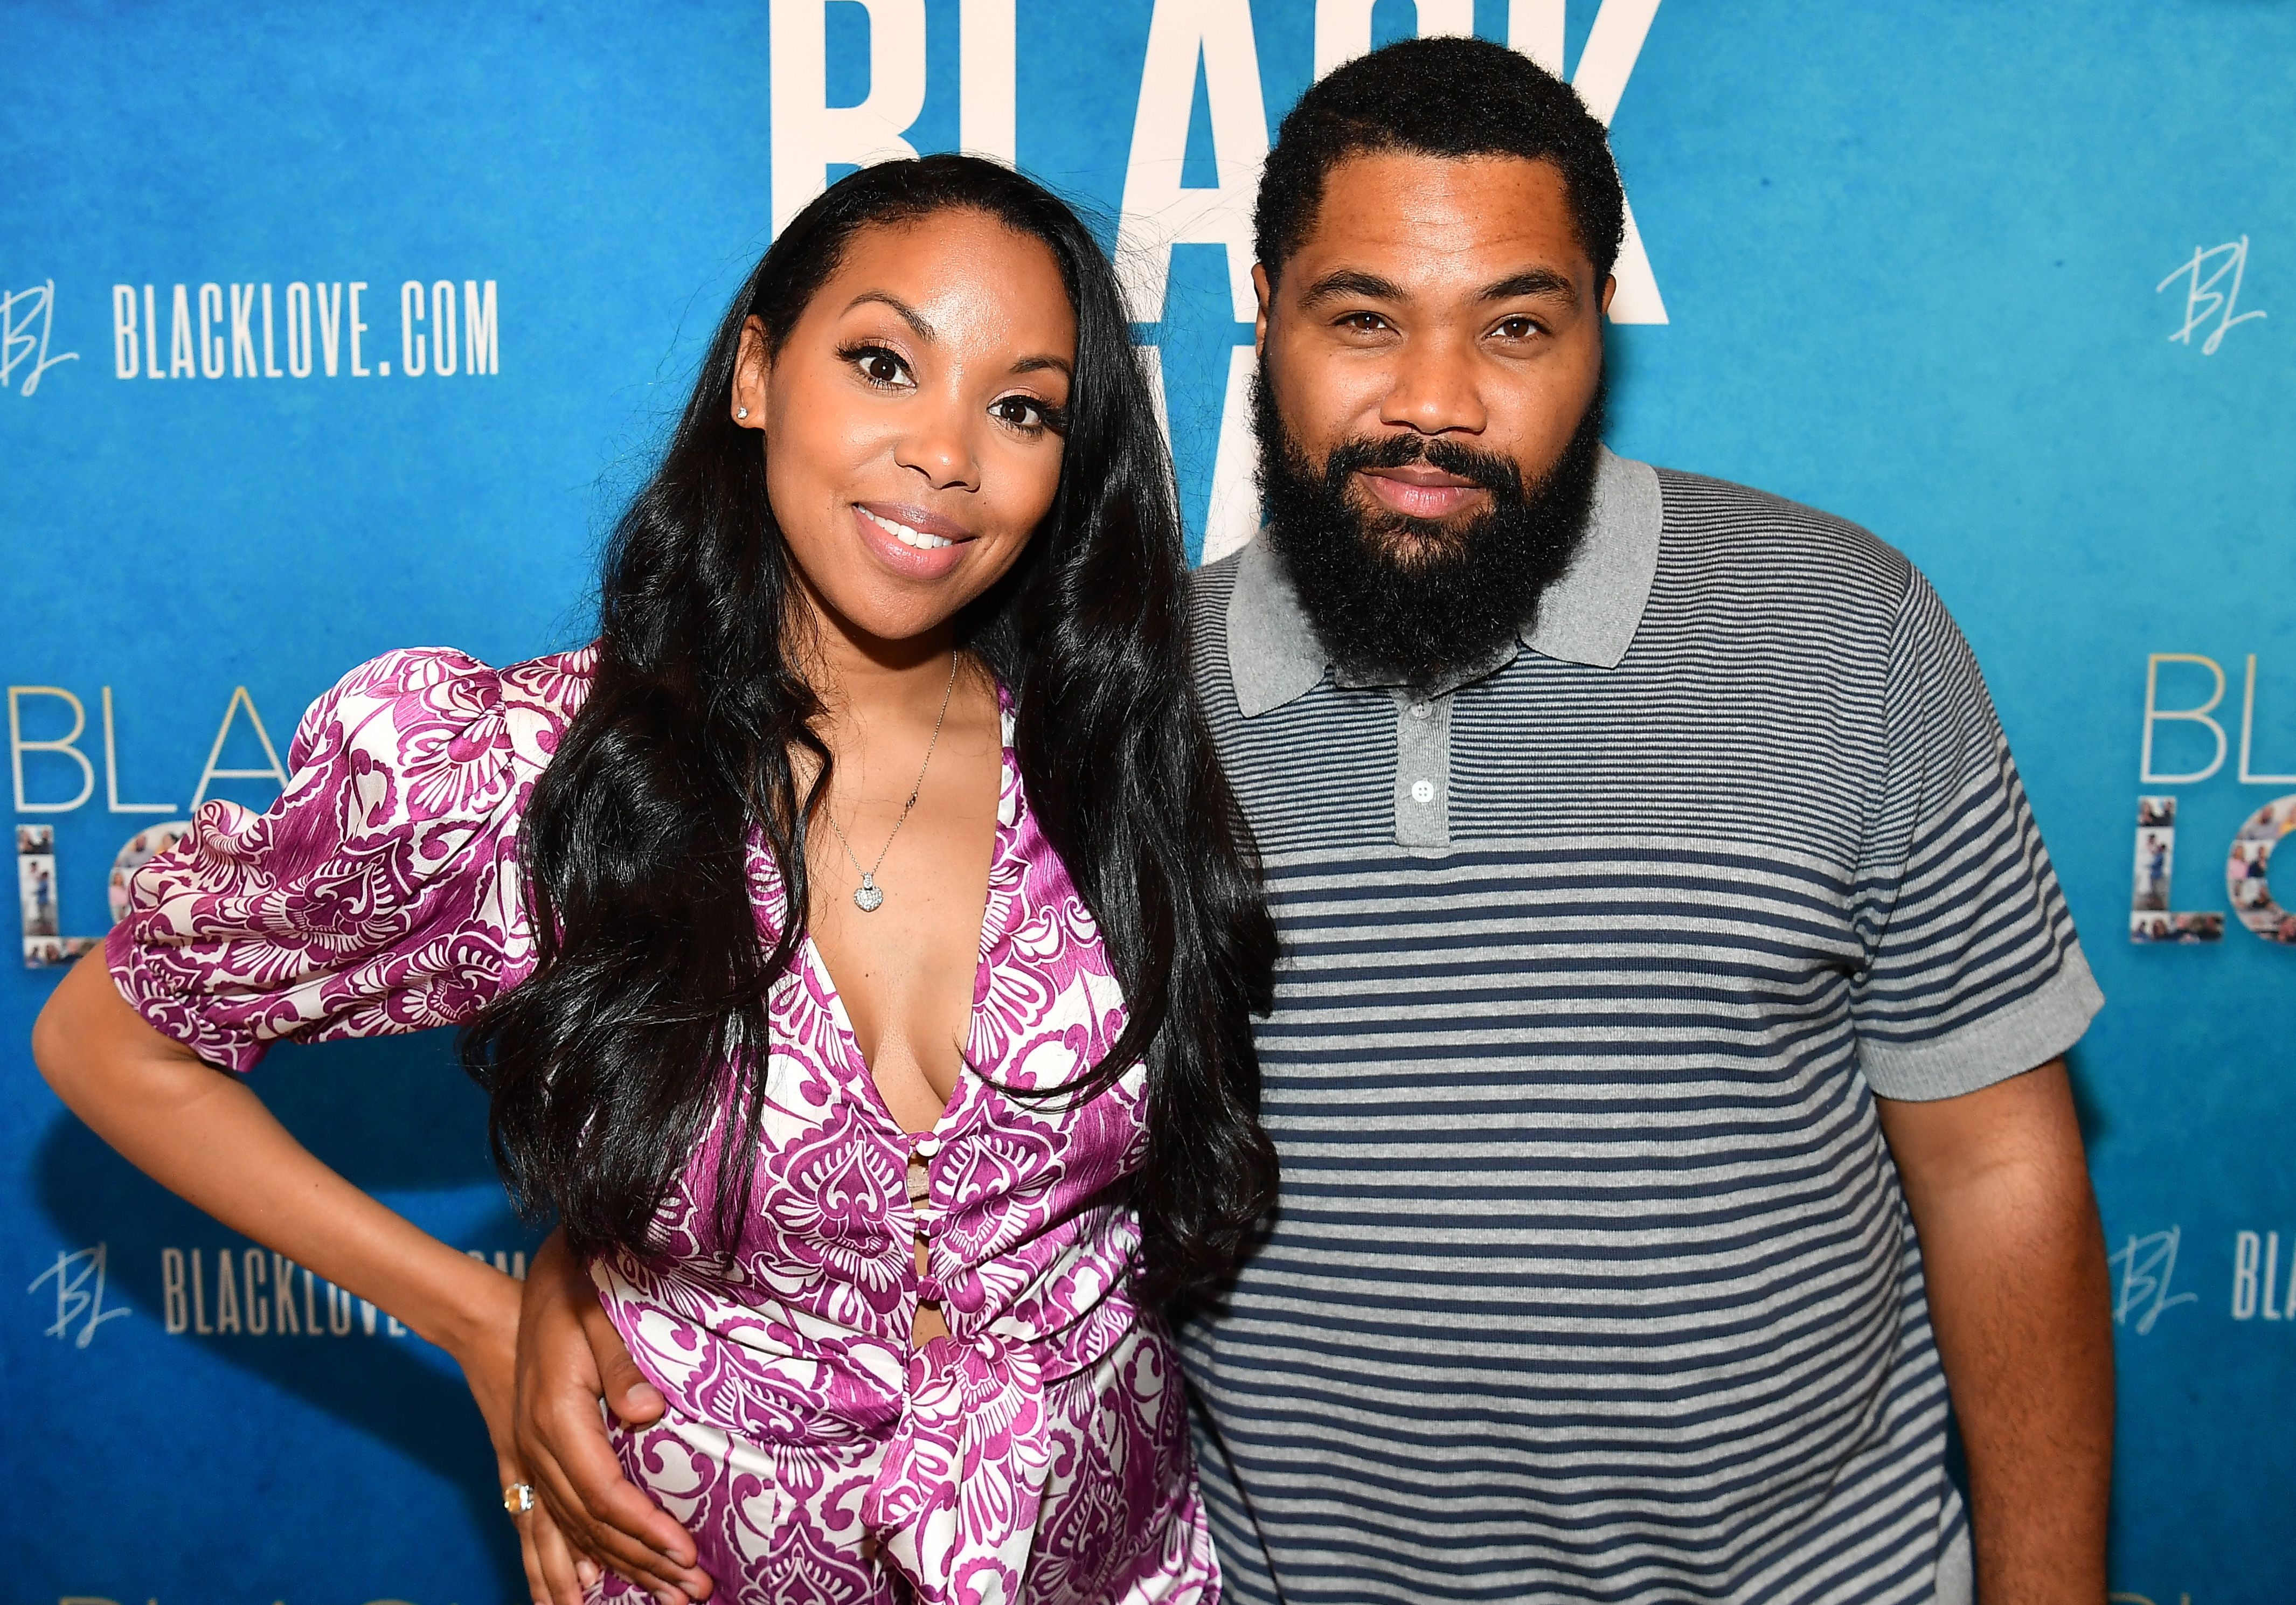 The Relationship Goals, Secrets, and Season-Three Surprises in OWNs Black Love pic